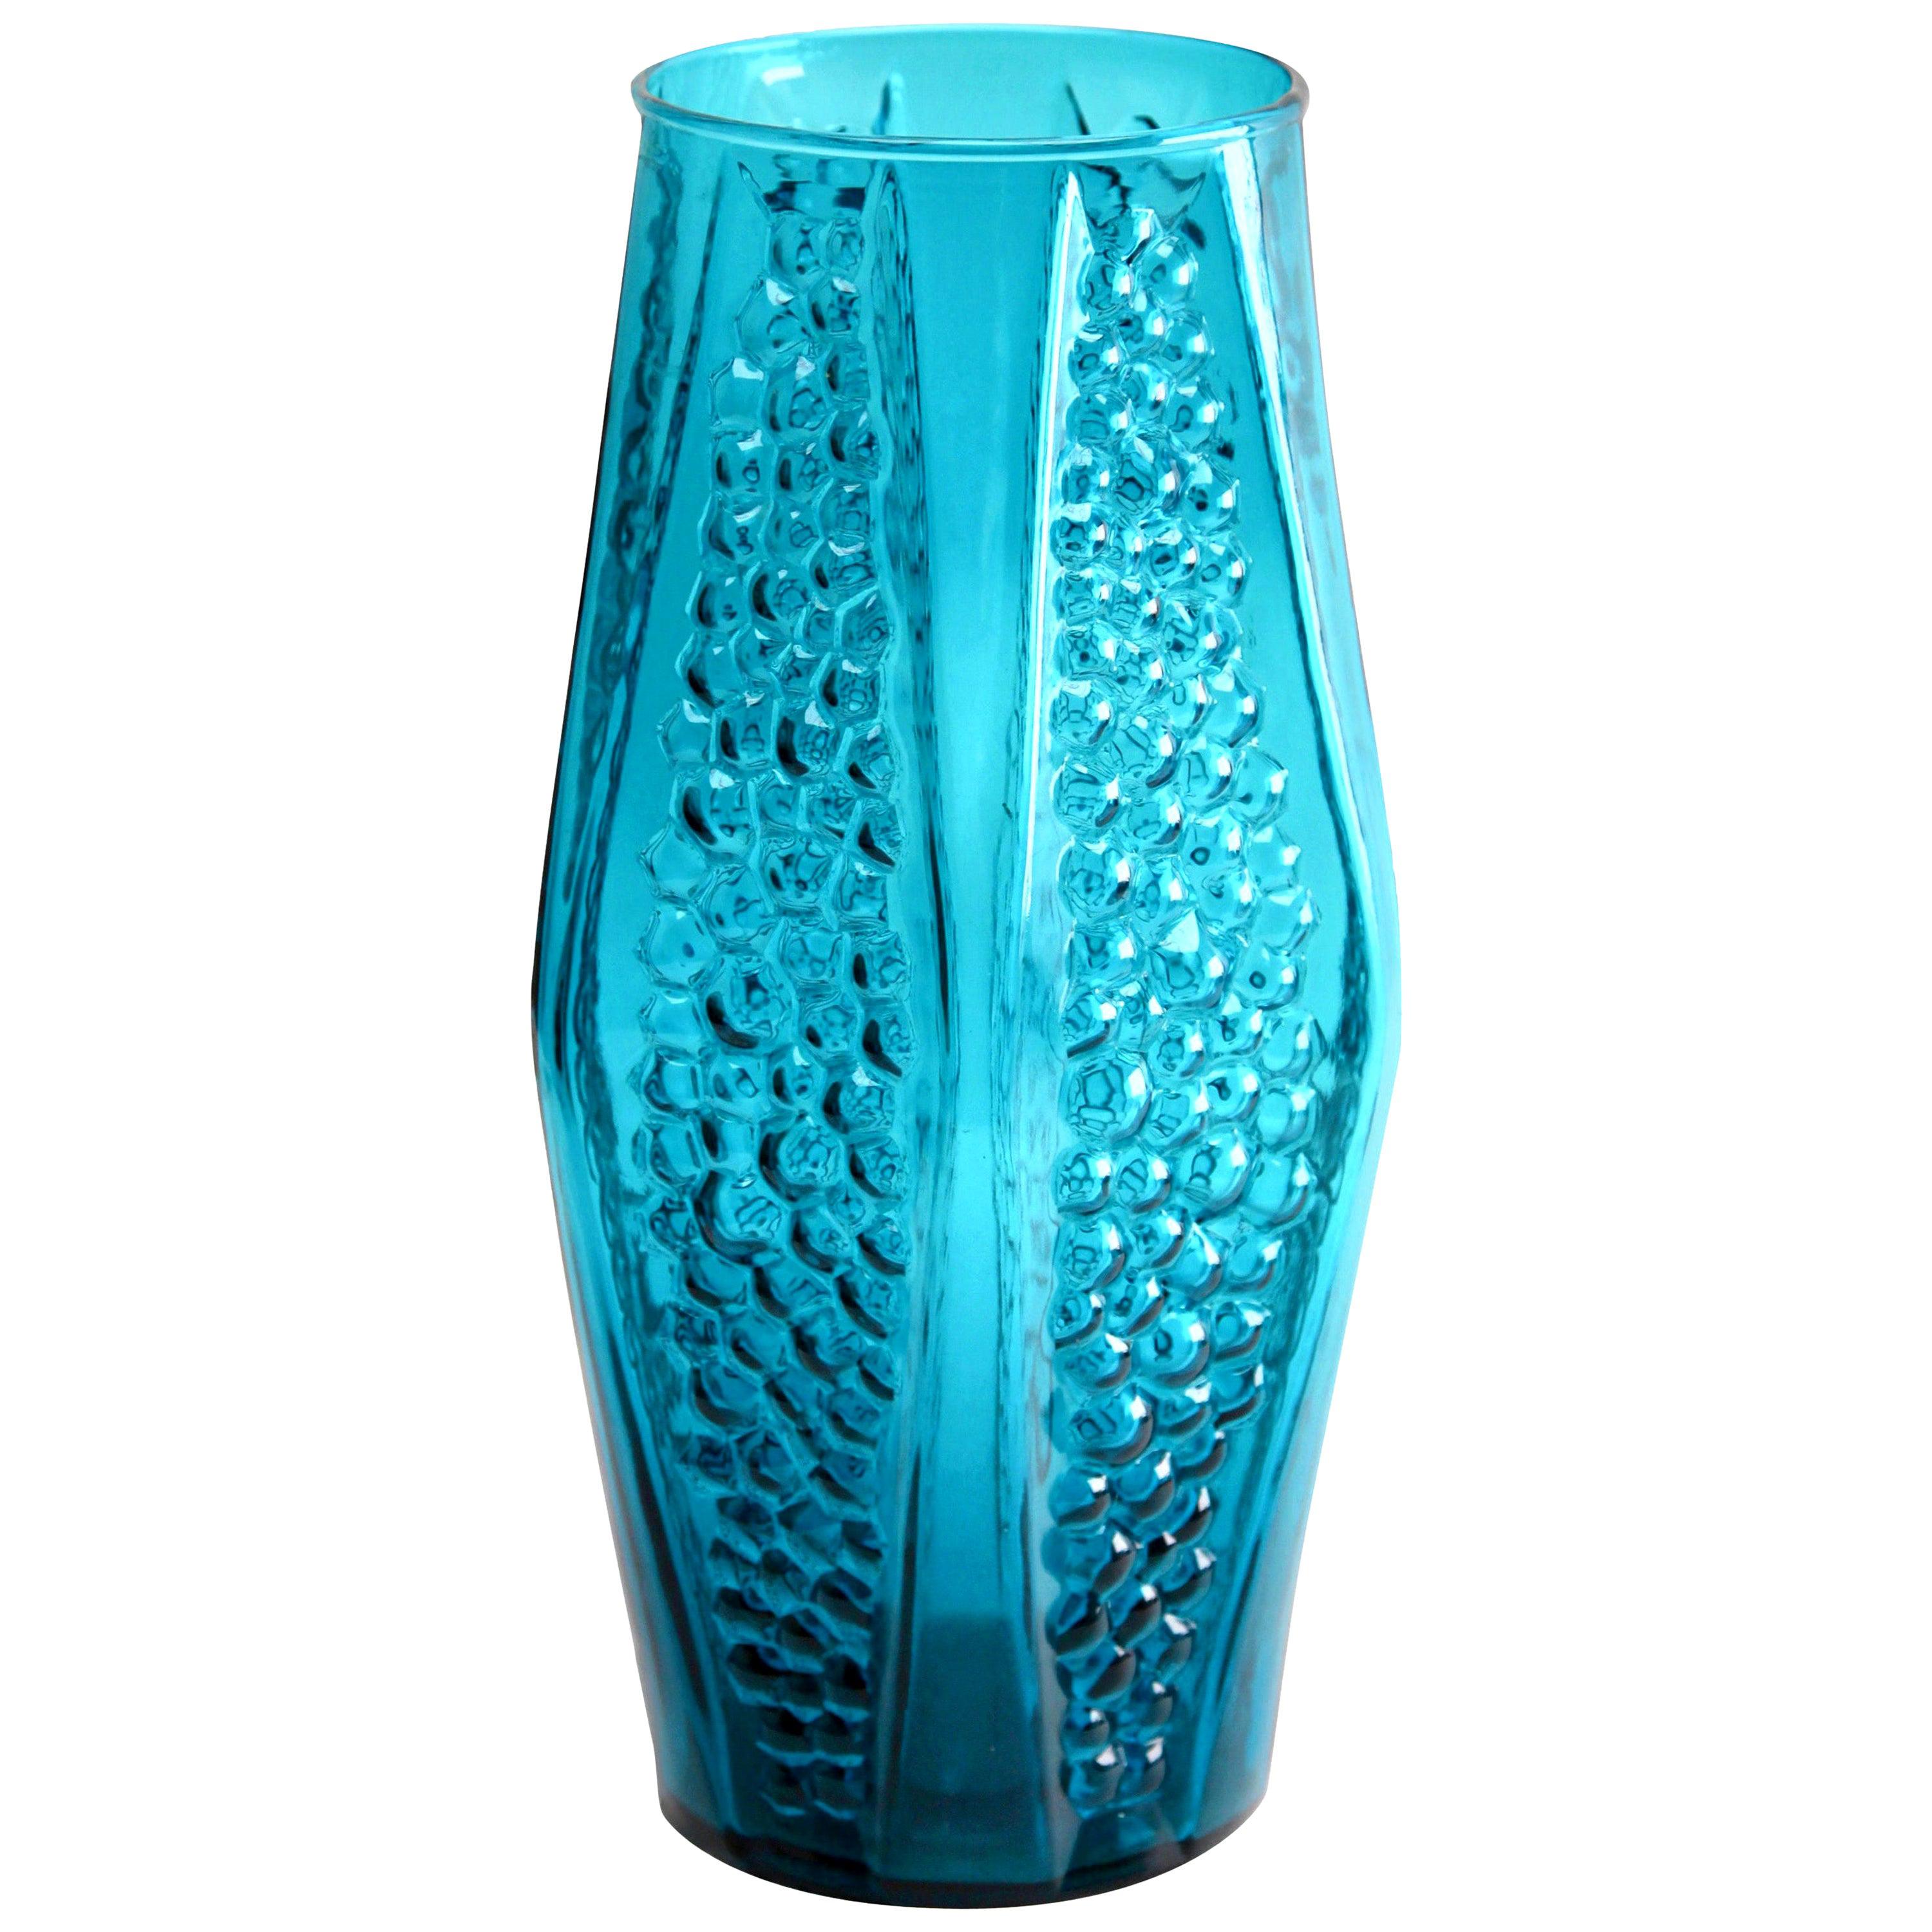 Stolle-Nieman 'Attributed' Hexagonal Vase with Bubbled Texture, 1970s For Sale